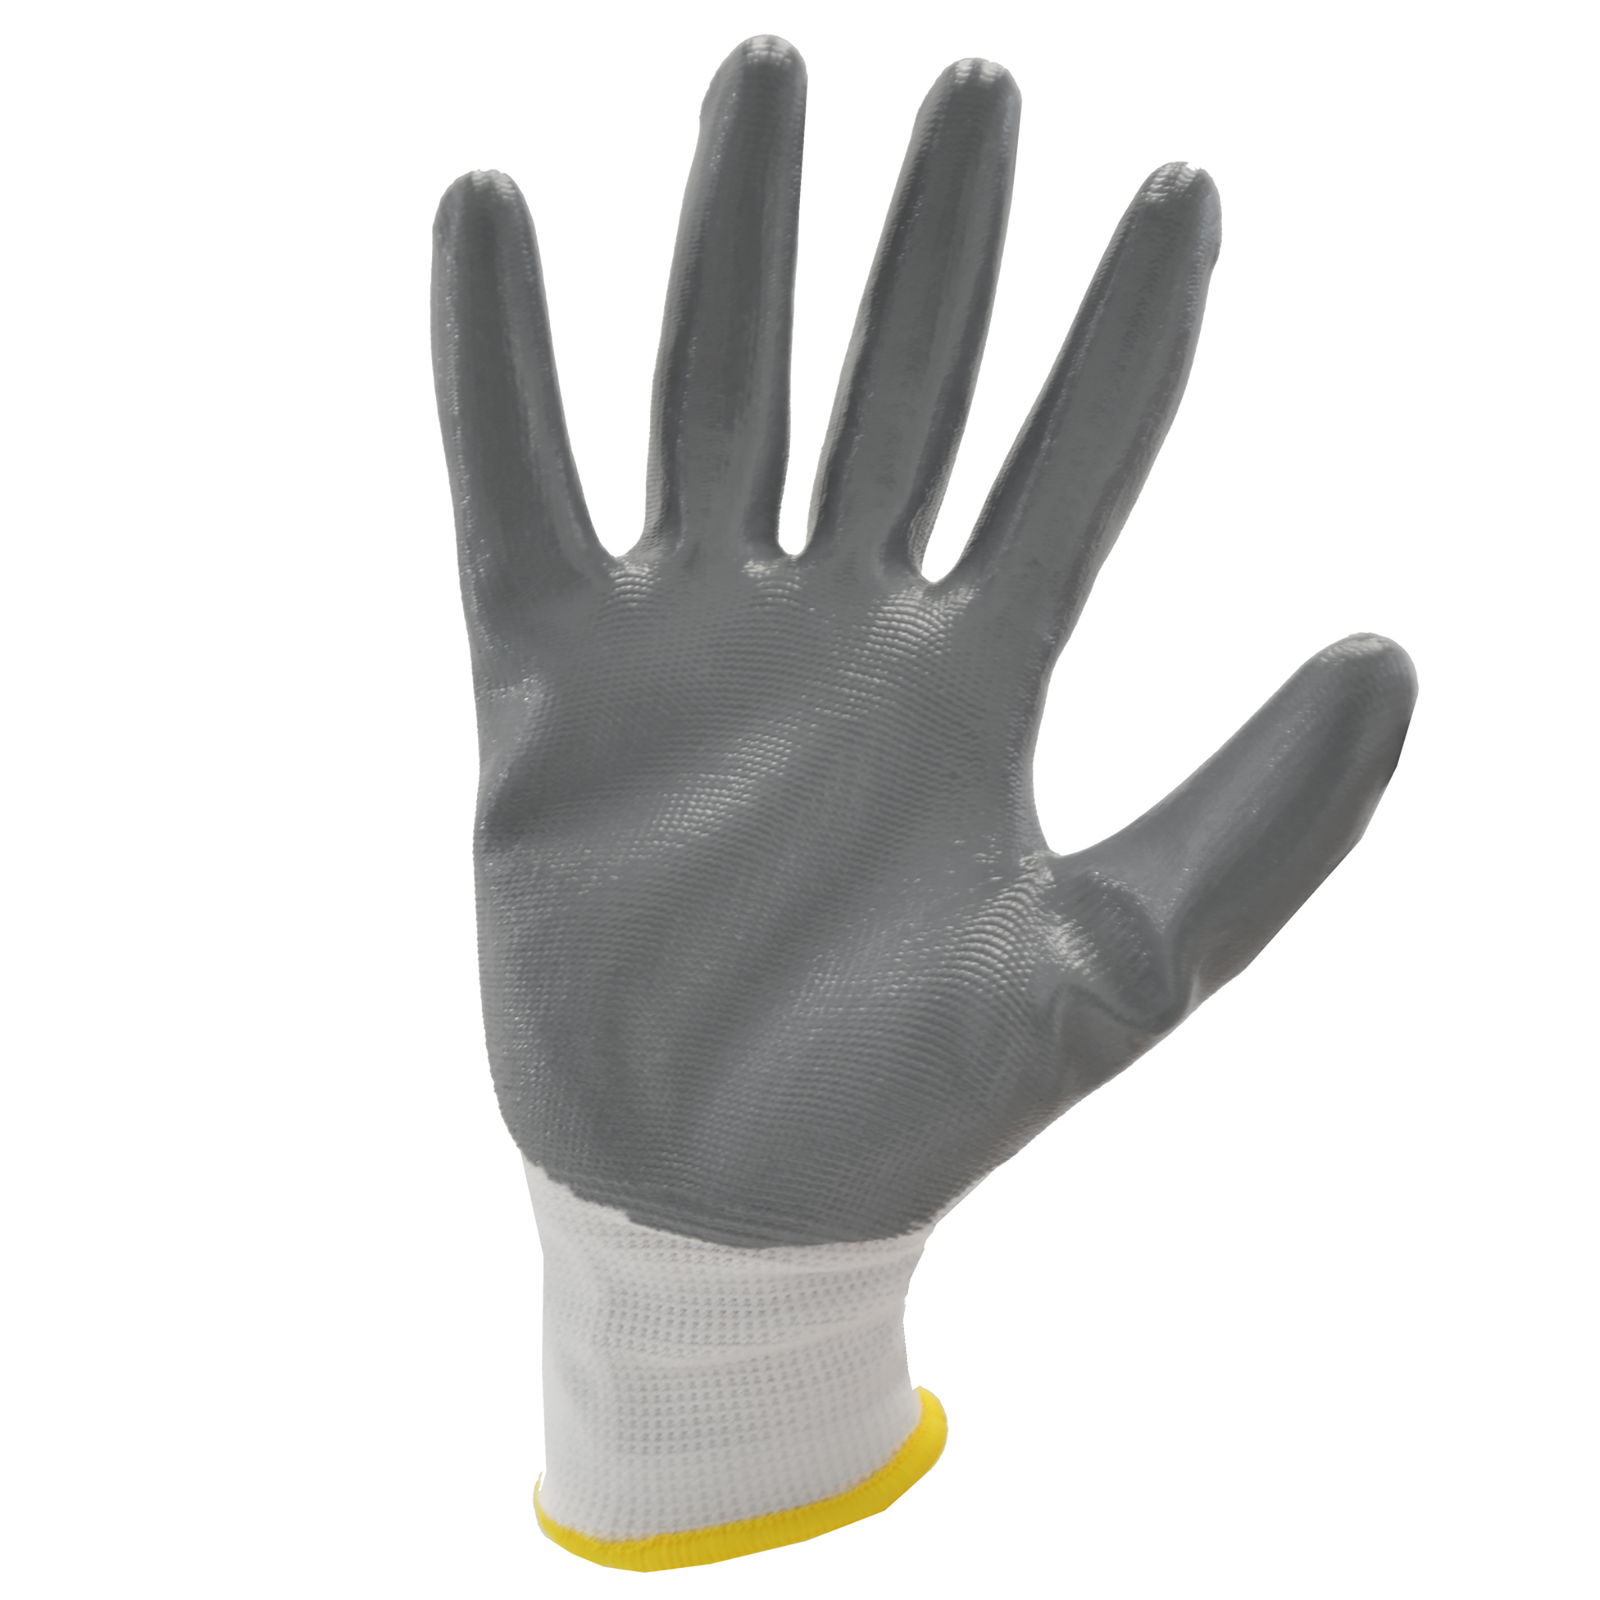 Gray palm side of the JORESTECH safety glove with nitrile dipped palms.